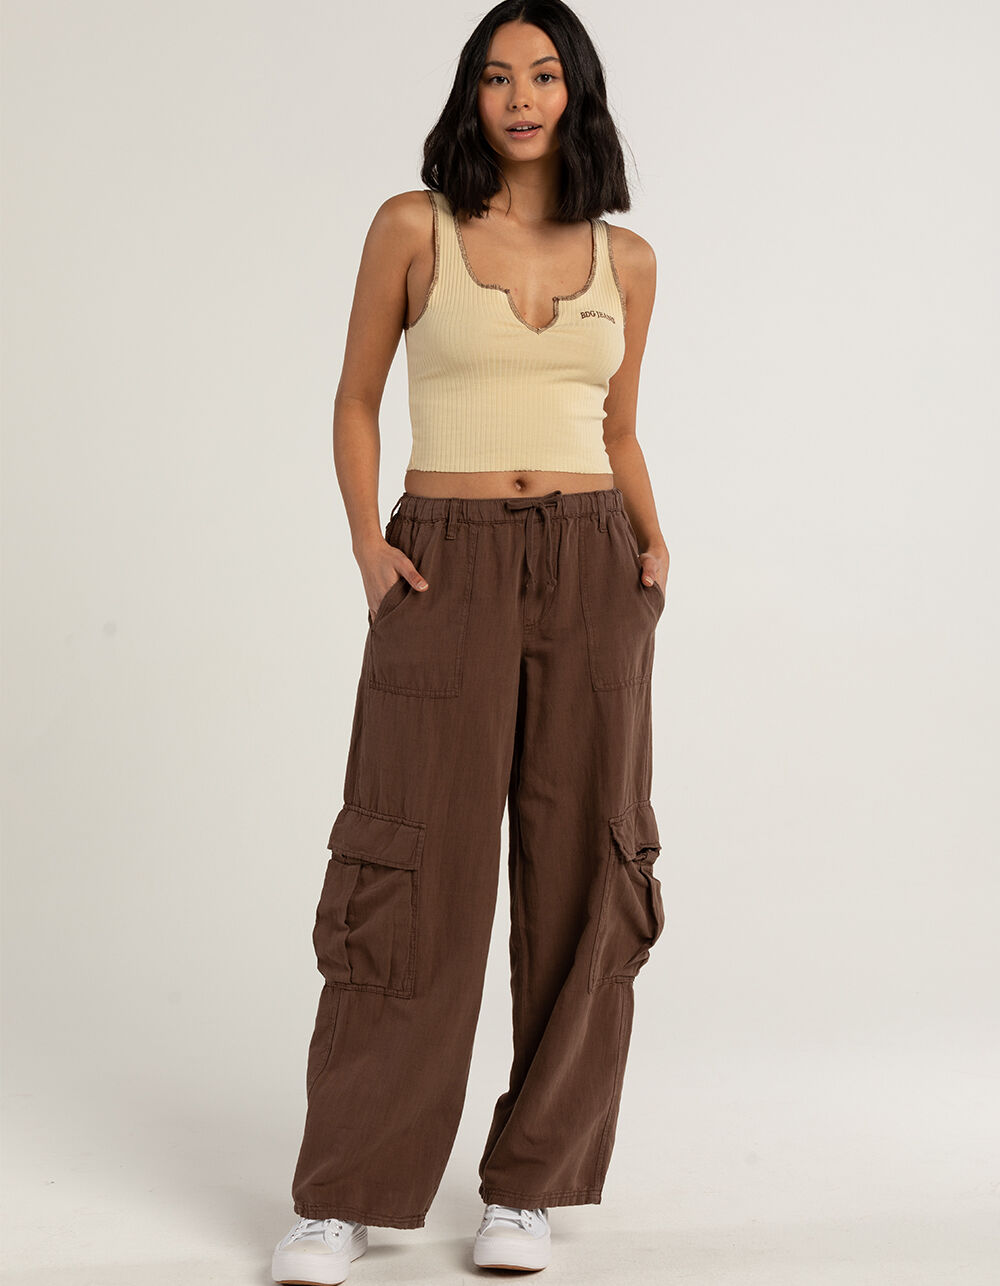 Bdg Urban Outfitters Linen Y2K Cargo Pants - Light Brown - Small